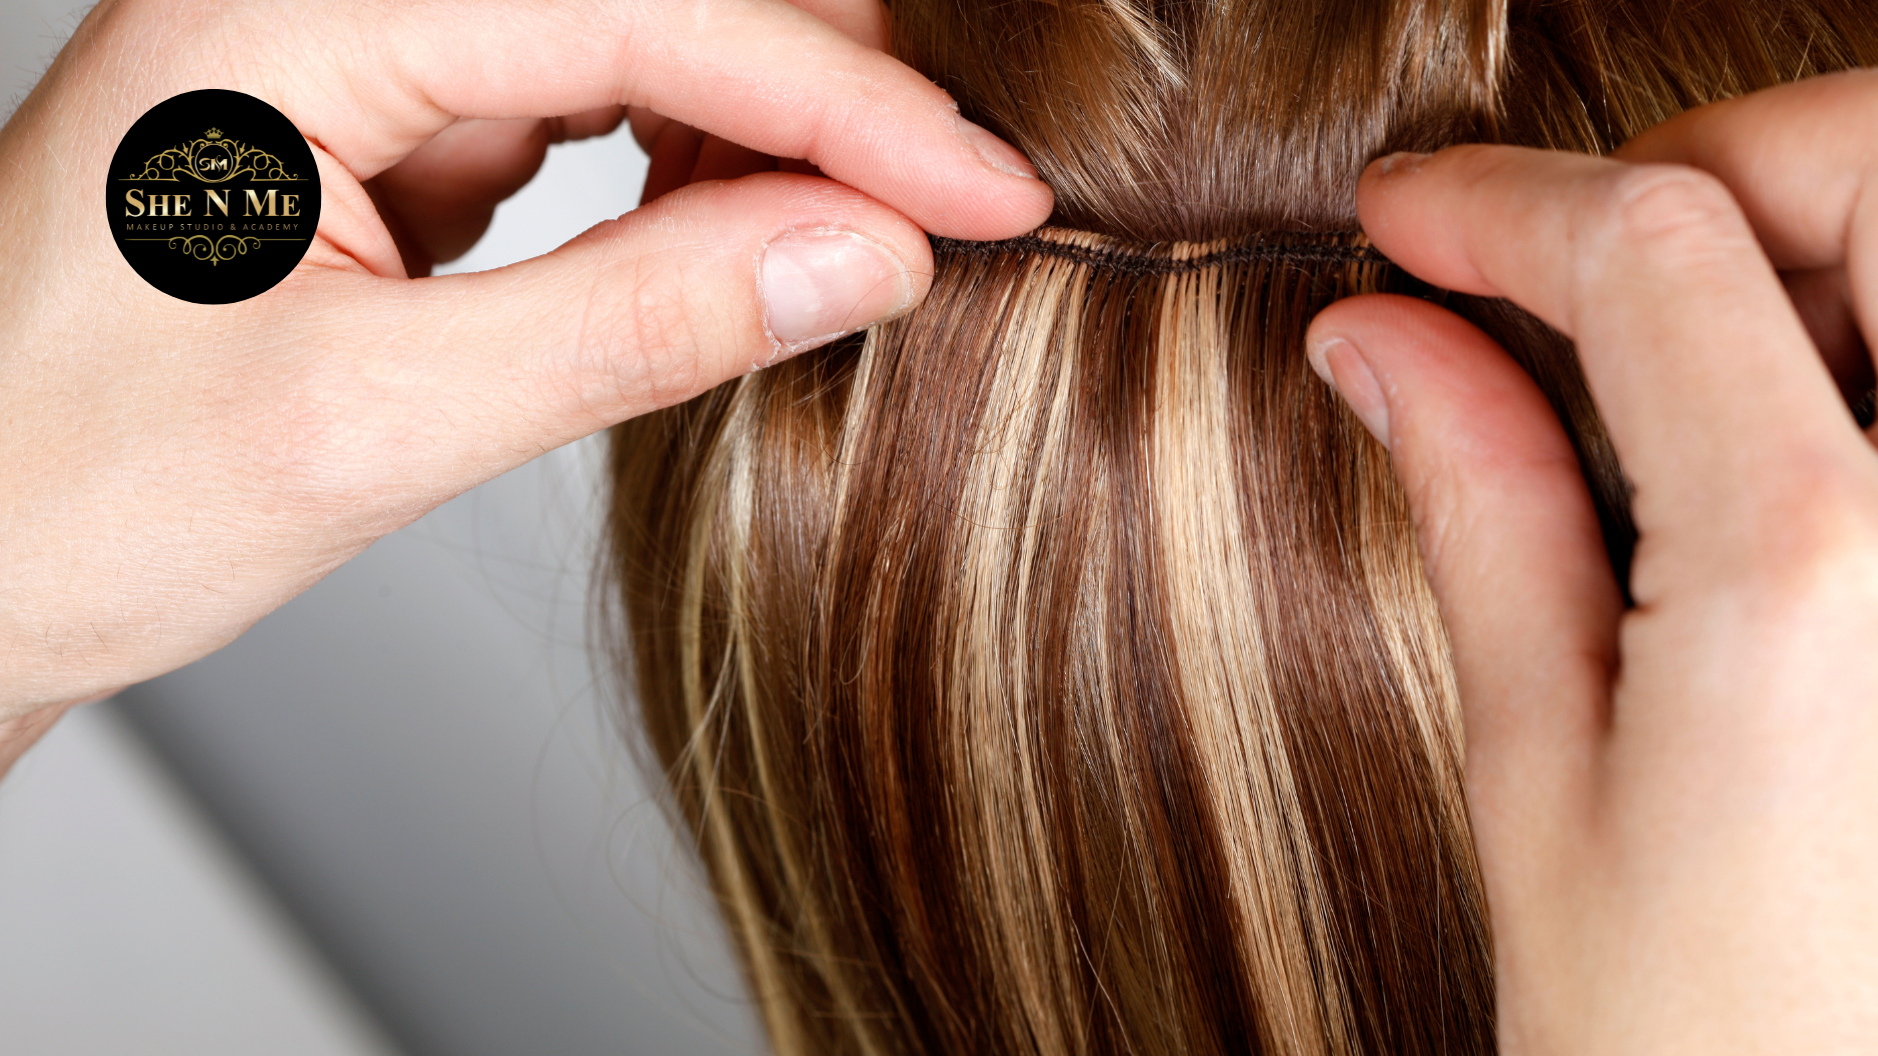 WHICH IS THE BEST SALON FOR HAIR EXTENSION IN VARANASI?